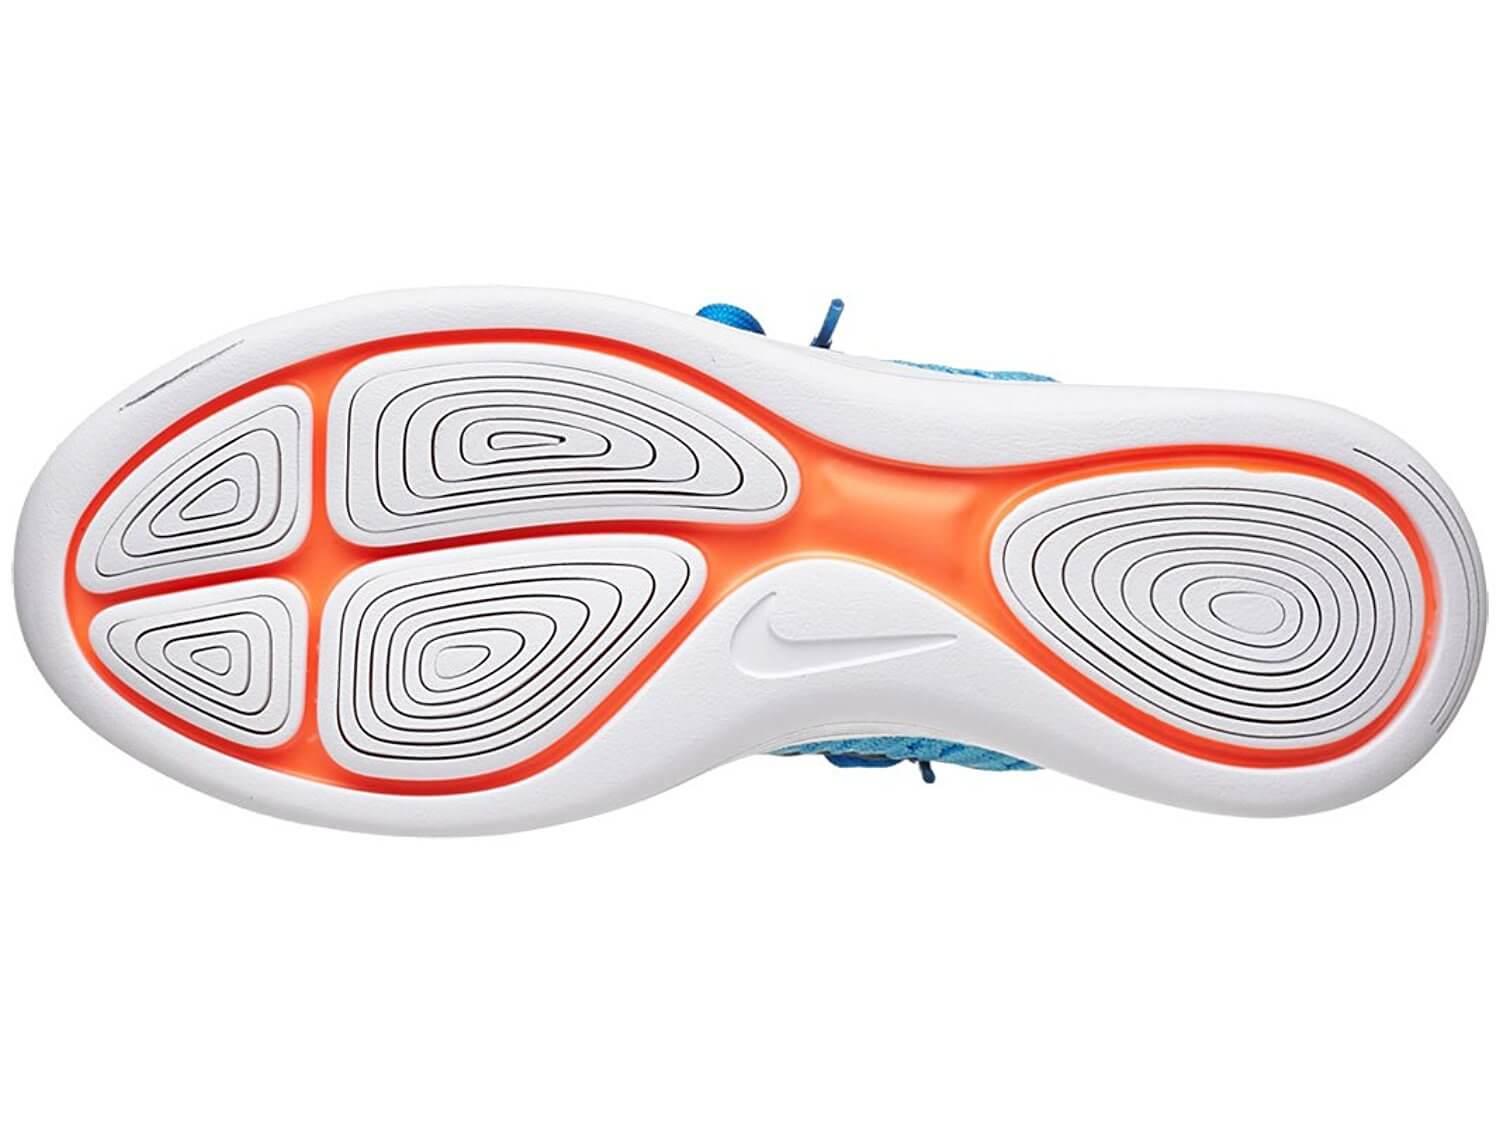 Laser cutting technology was used to construct the Nike LunarEpic Flyknit's outsole.